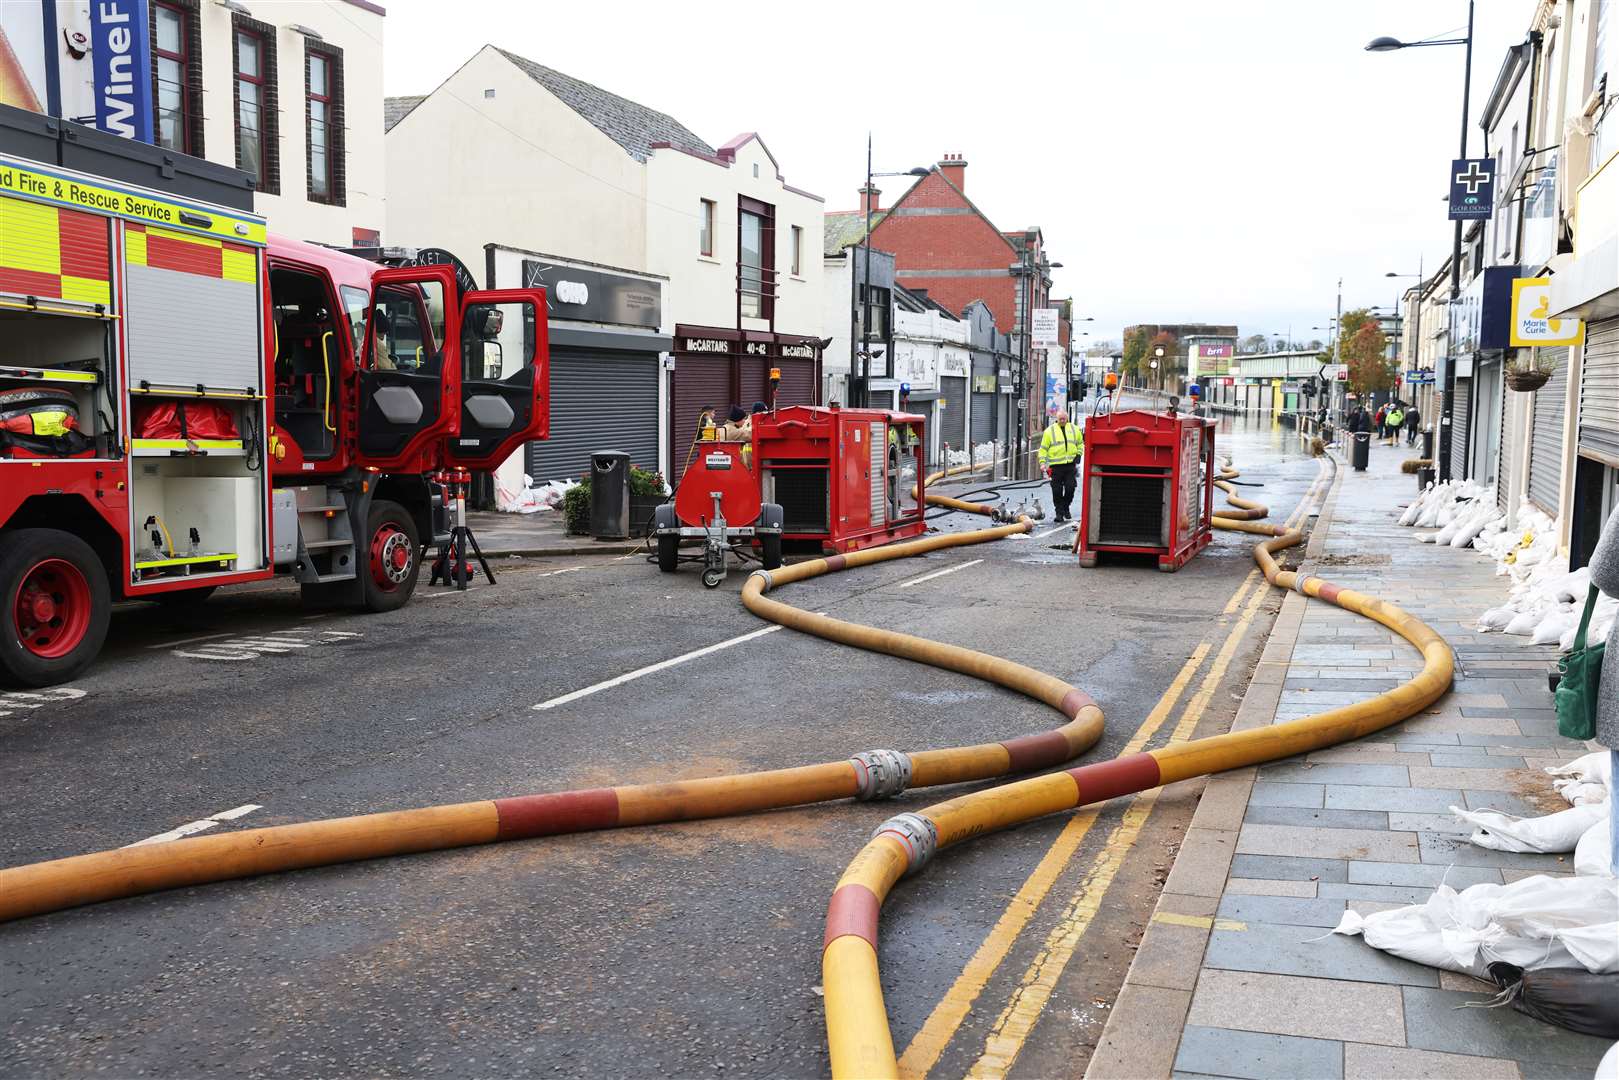 Northern Ireland Fire and Rescue Service pumped water from flooded premises in Downpatrick town centre on Saturday (Peter Morrison/PA)